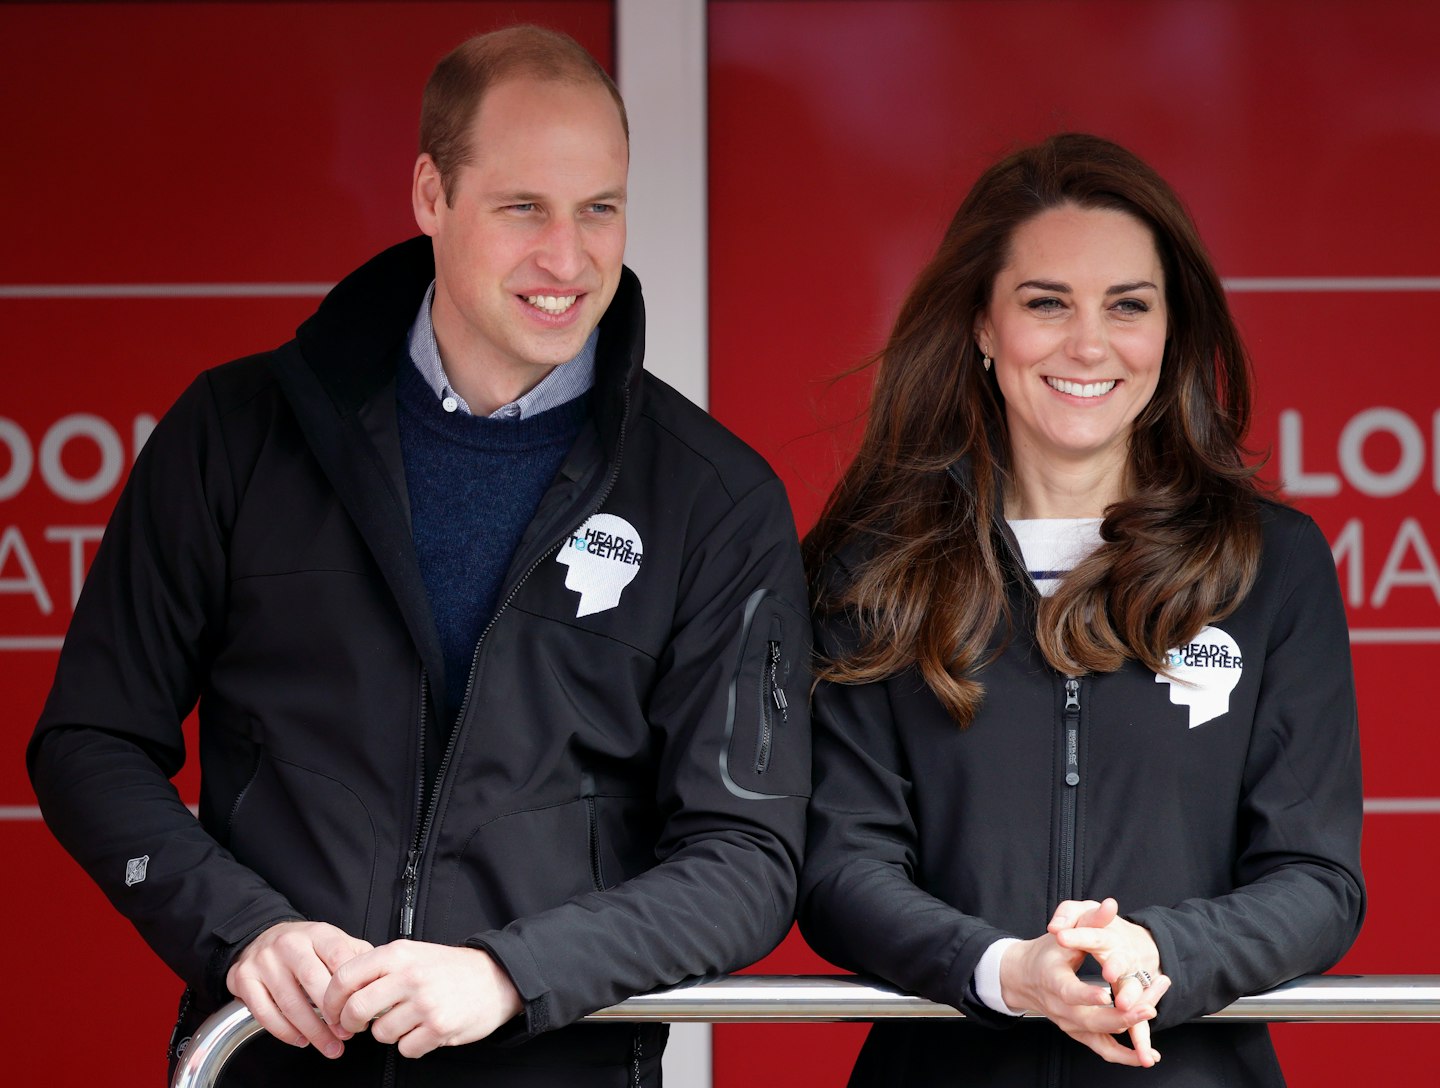 Kate Middleton and Prince William attend the London Marathon